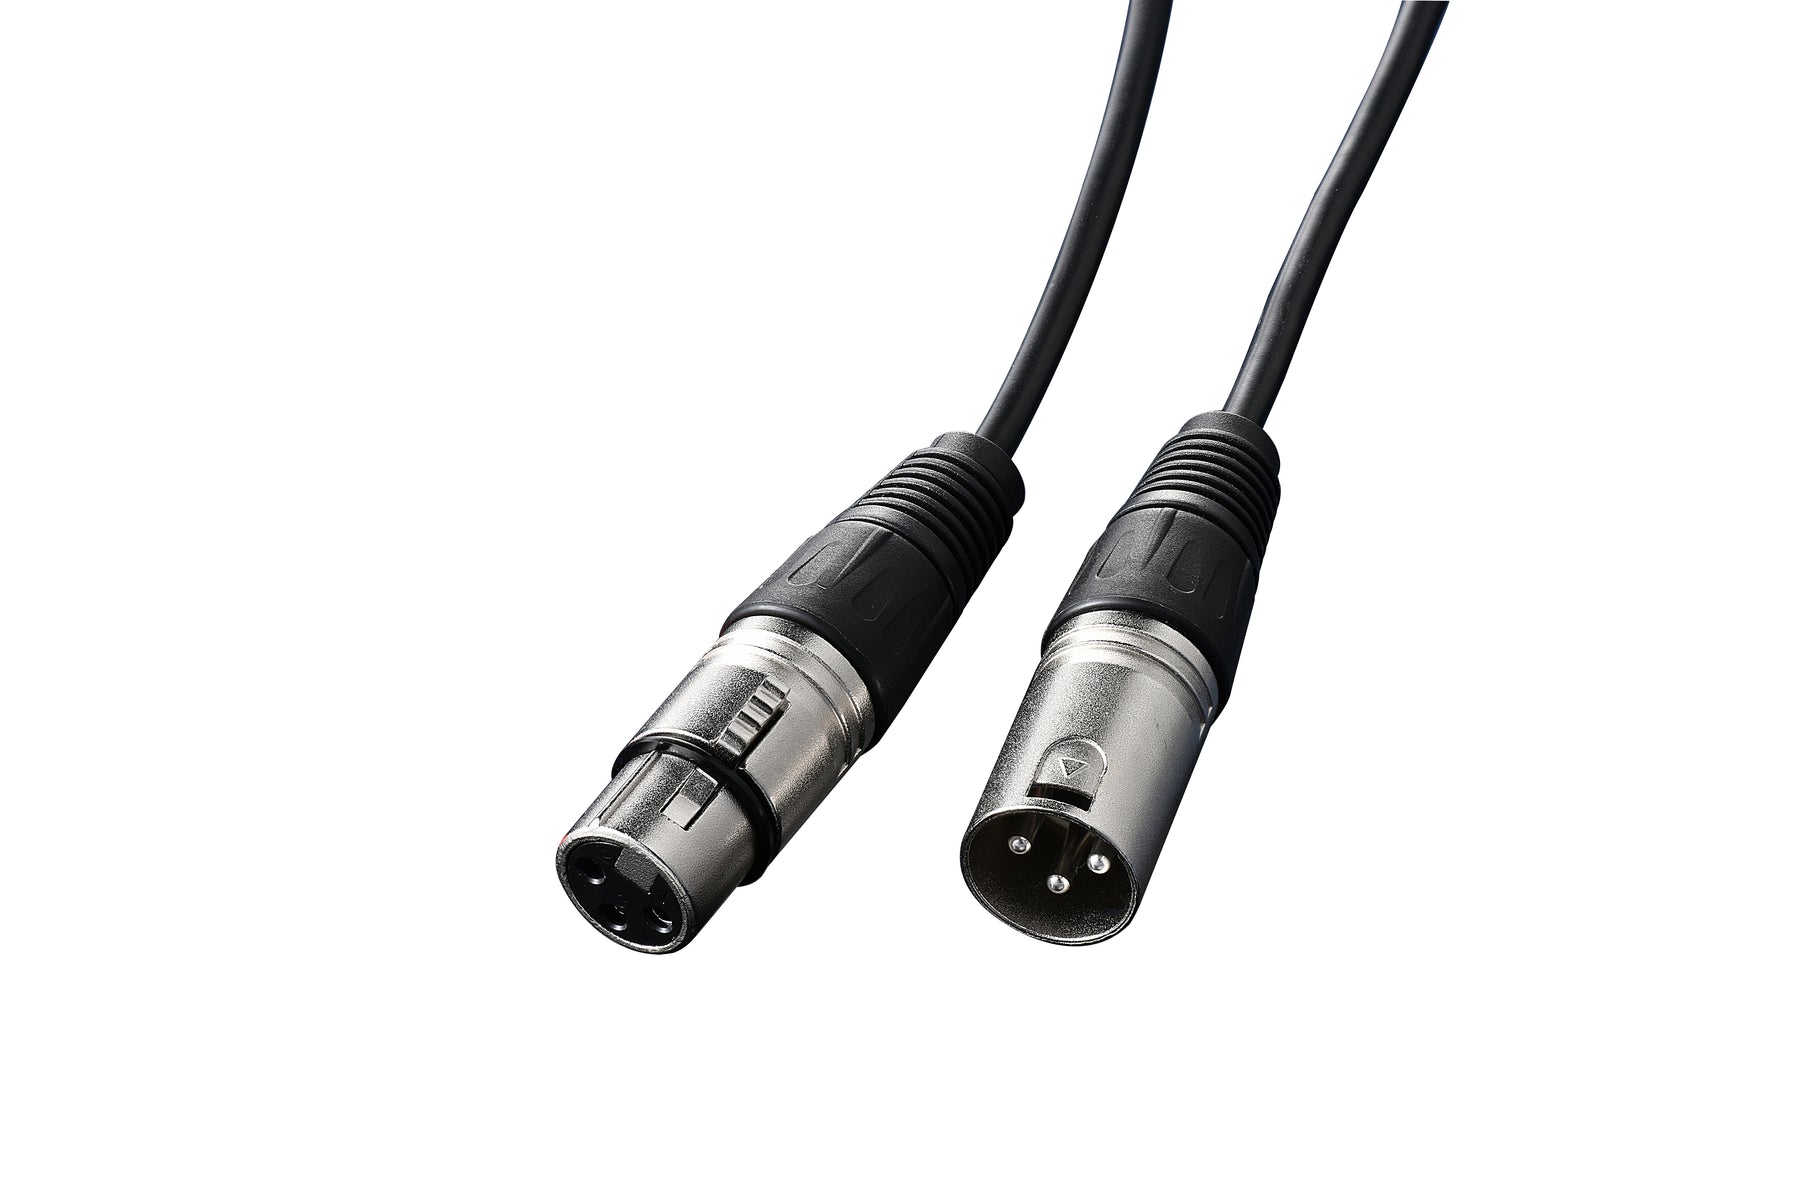 IBRA XLR Mic Cable Premium Quality Pro Microphone Lead | Balanced Male XLR to Female XLR | 0.75 Metre | Clearer Sound for PA Systems, Studio Recording, Mixers, Amplification & Speakers - BLACK